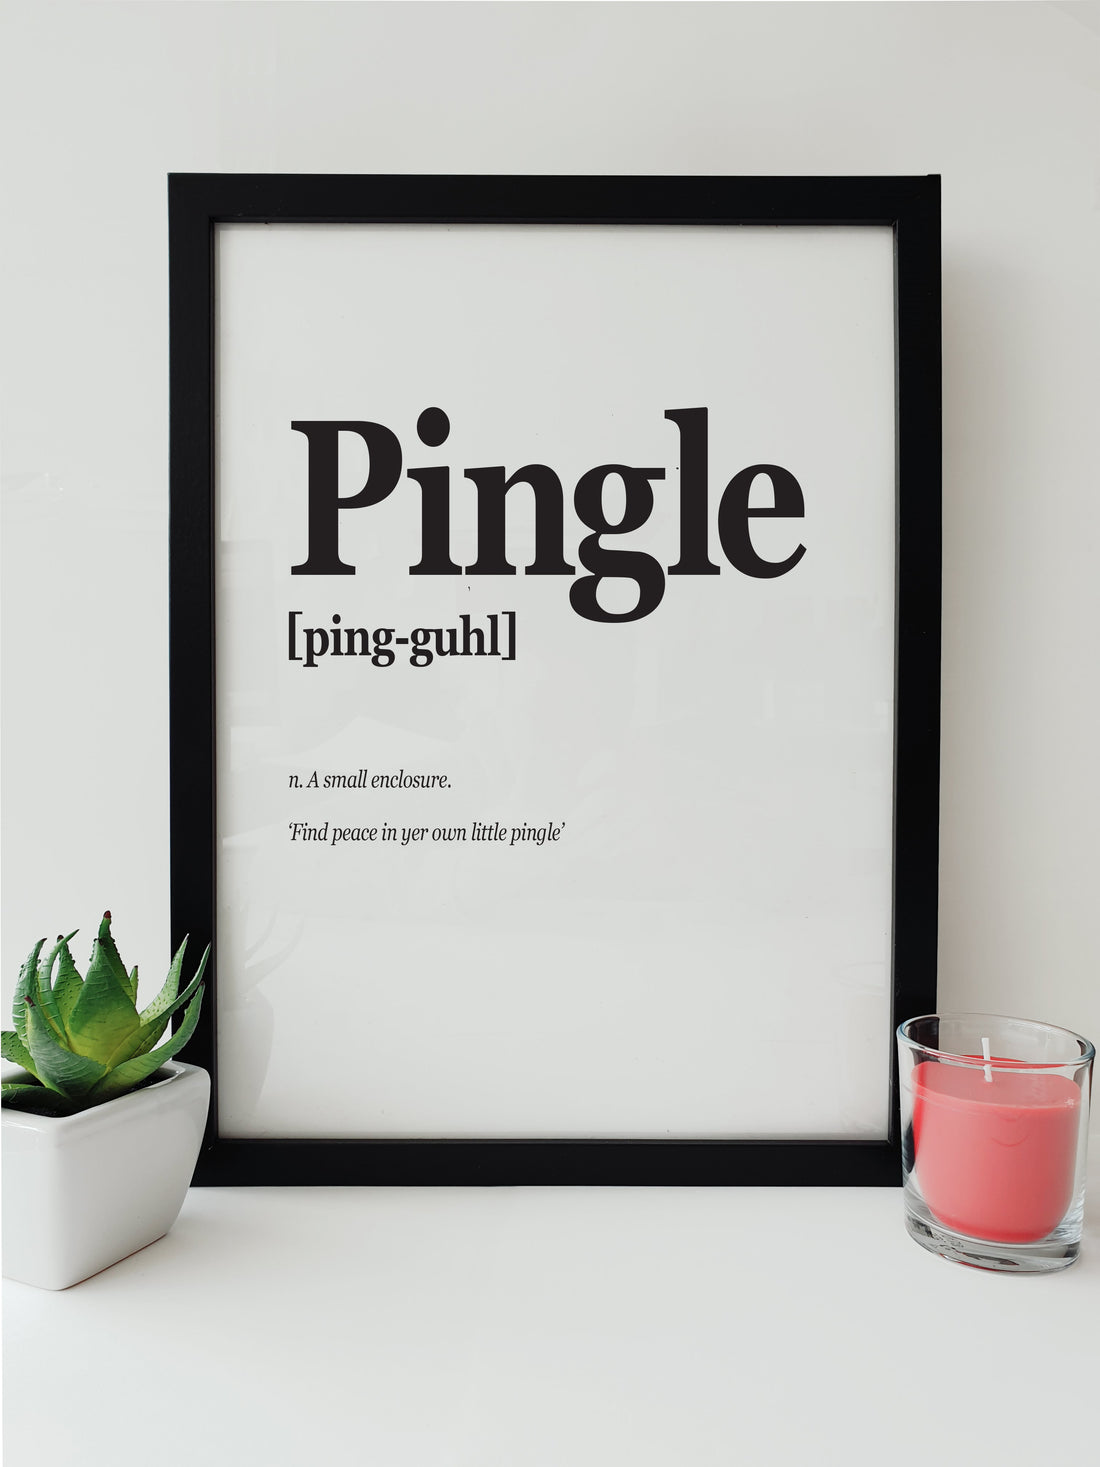 Decorative print showing the Suffolk dialect word 'Pingle', meaning a small enclosure, with the calming invitation 'Find peace in your own little pingle' in elegant typography. designed by local lingo